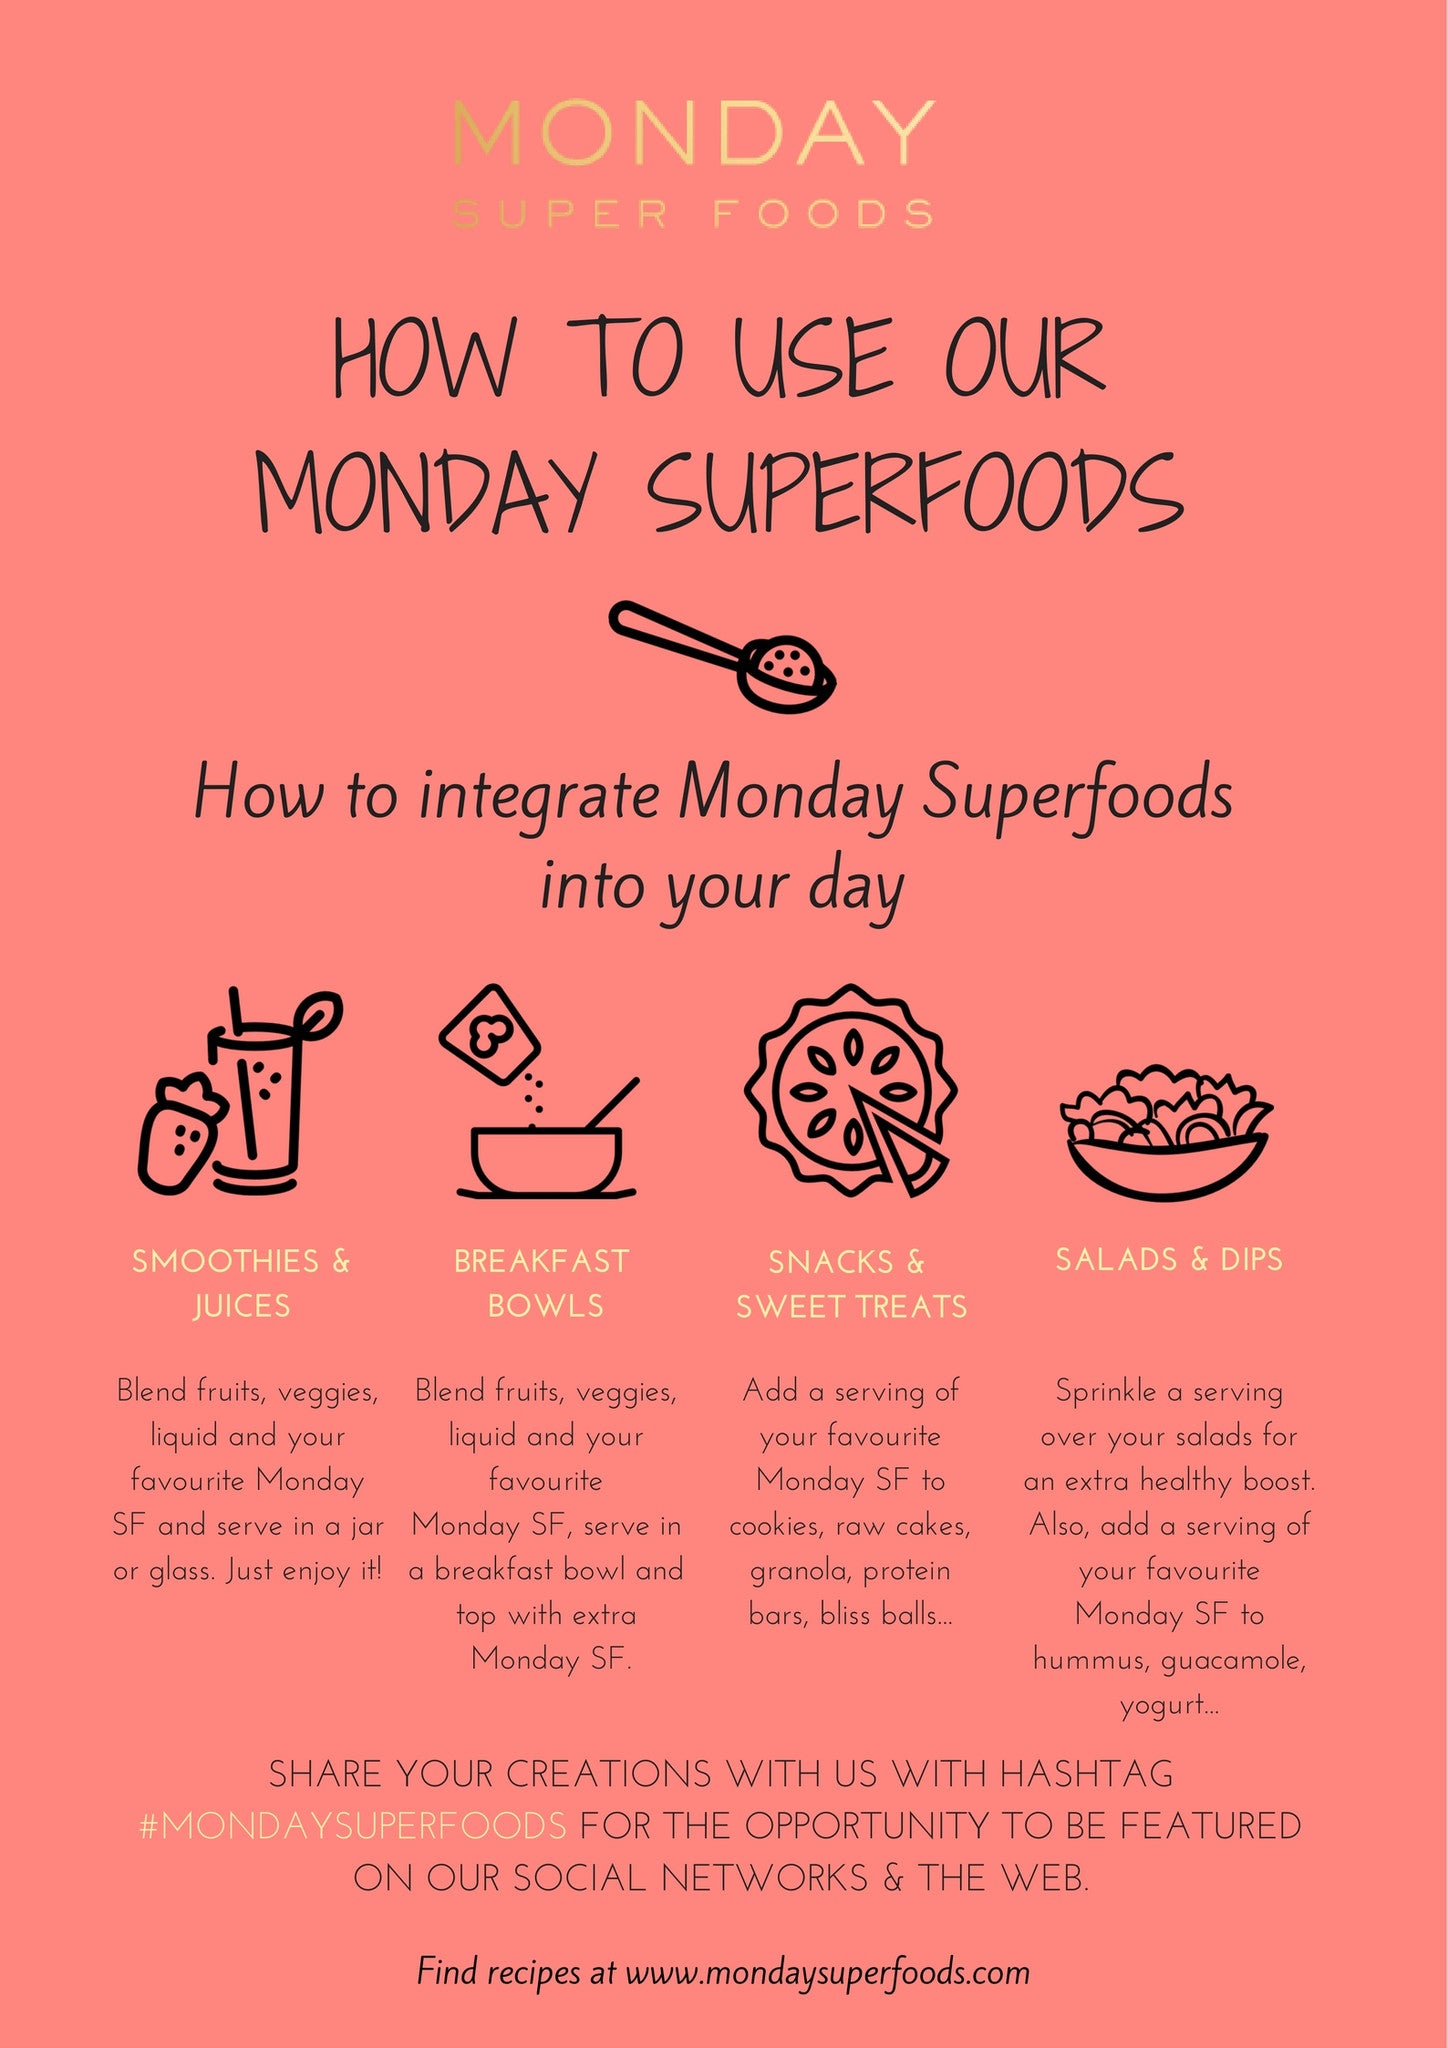 HOW TO USE MONDAY SUPERFOODS